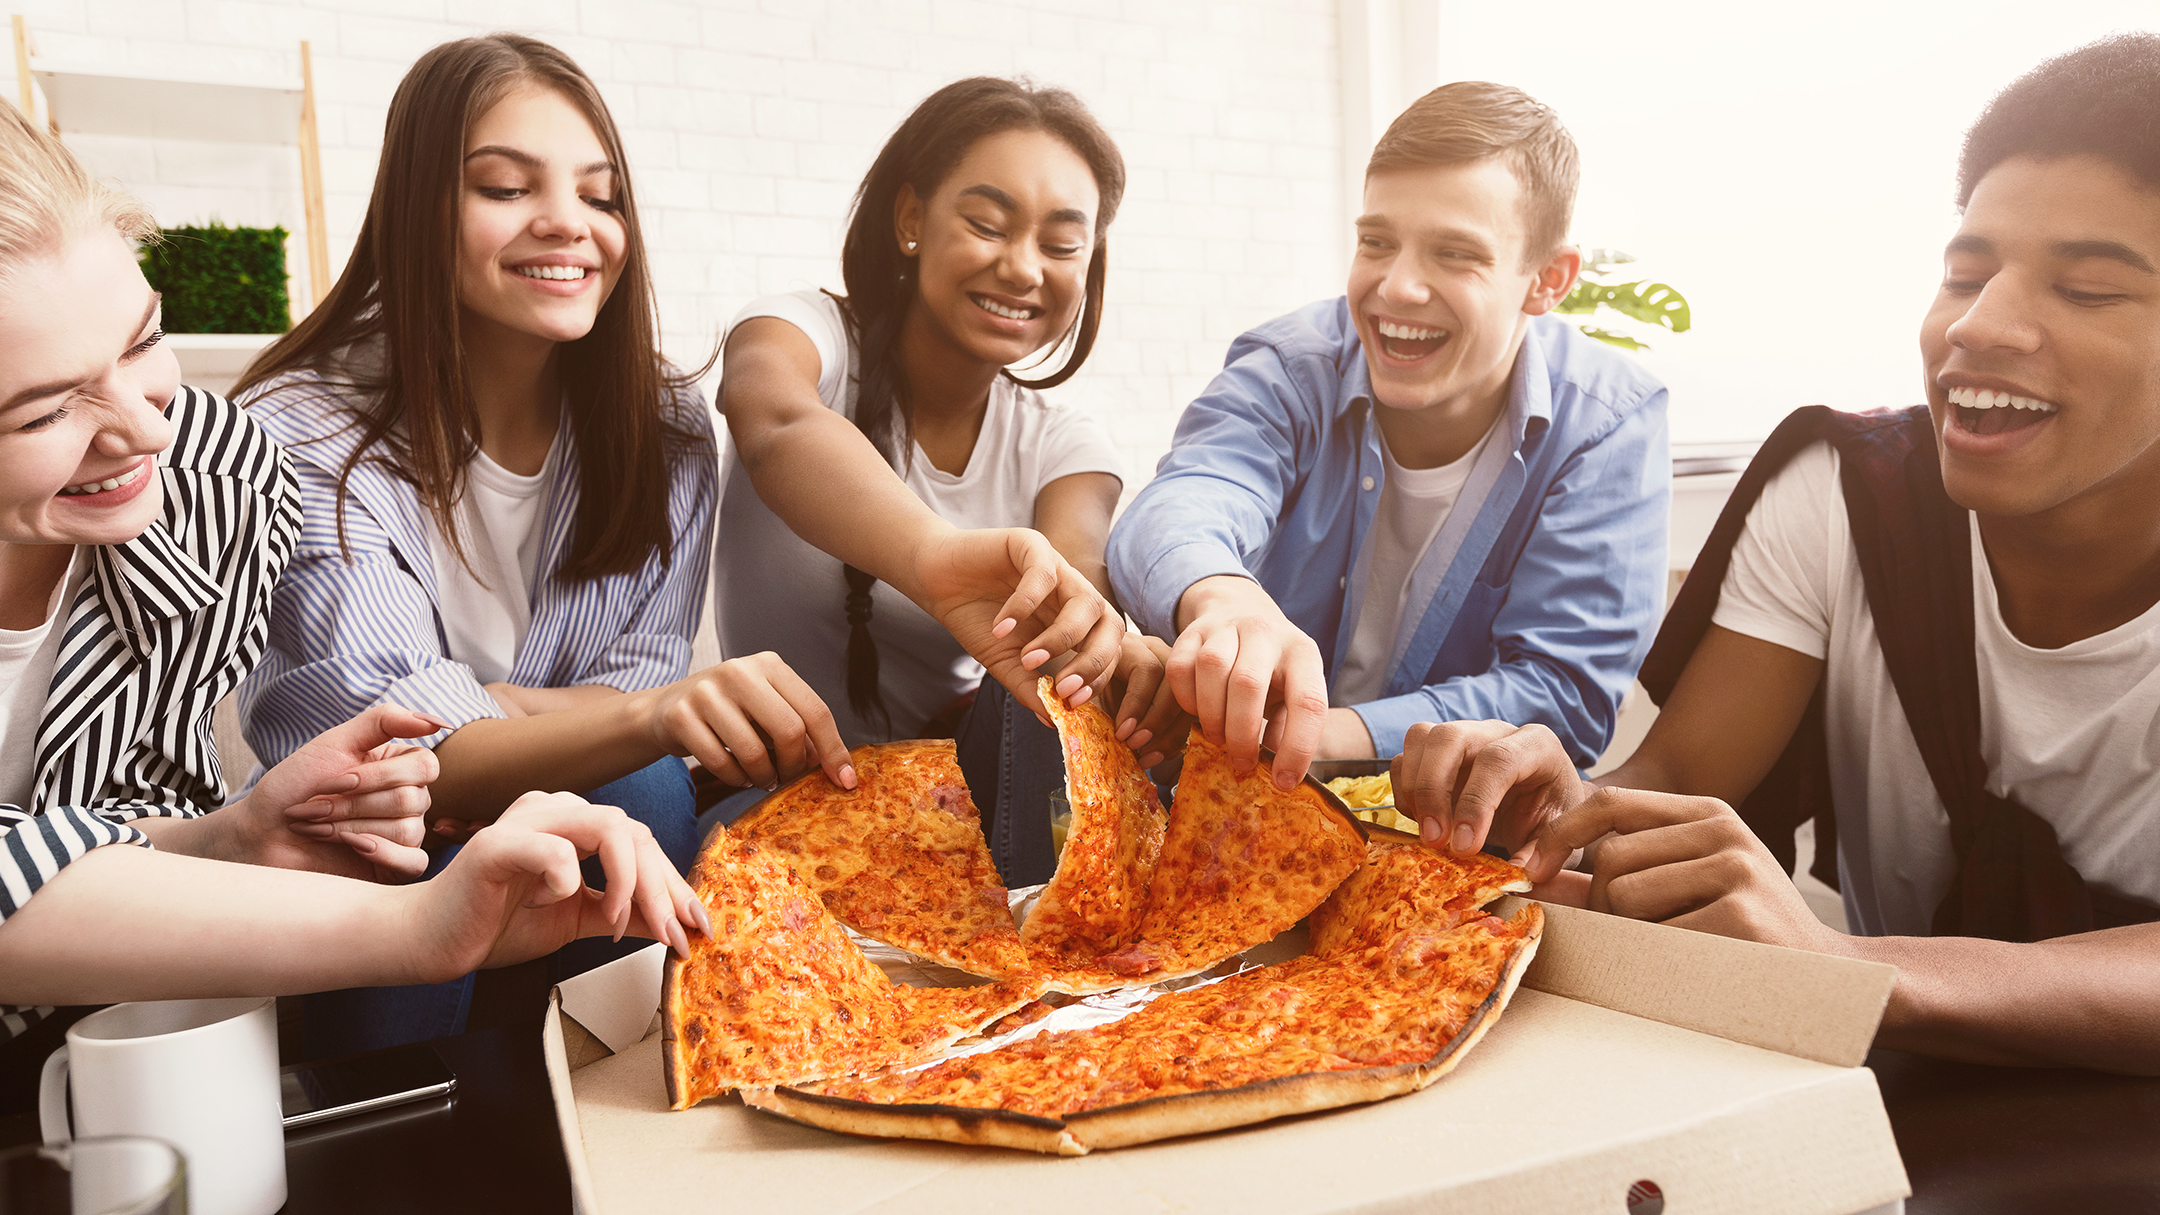 Happy students eating pizza and chatting at home